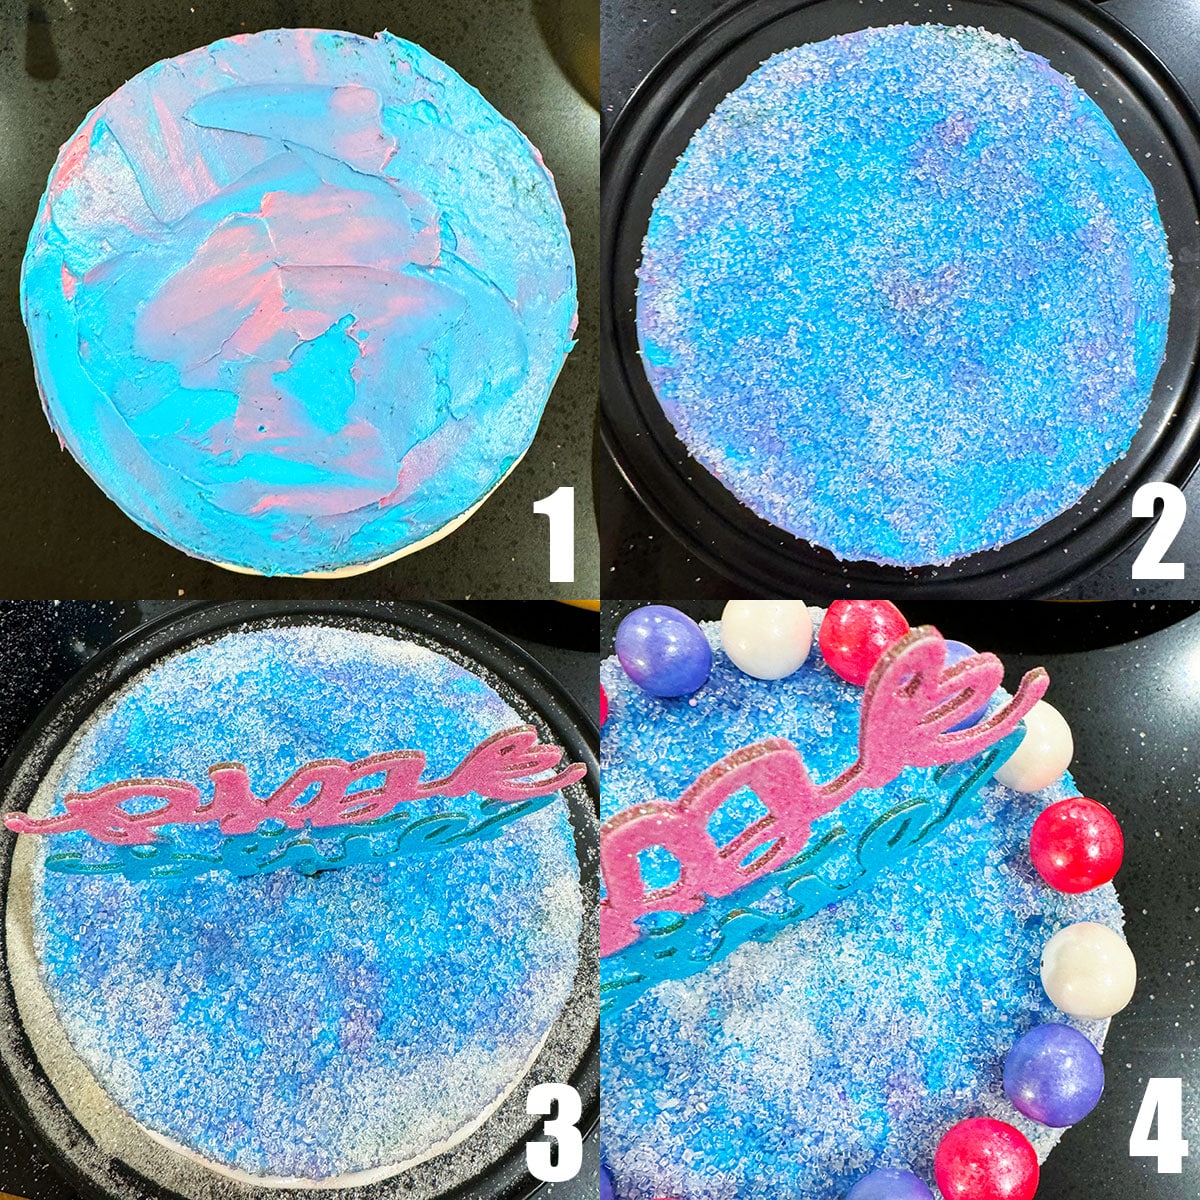 Collage Image With Step by Step Process Shots on How to Make Gender Reveal Cake. 